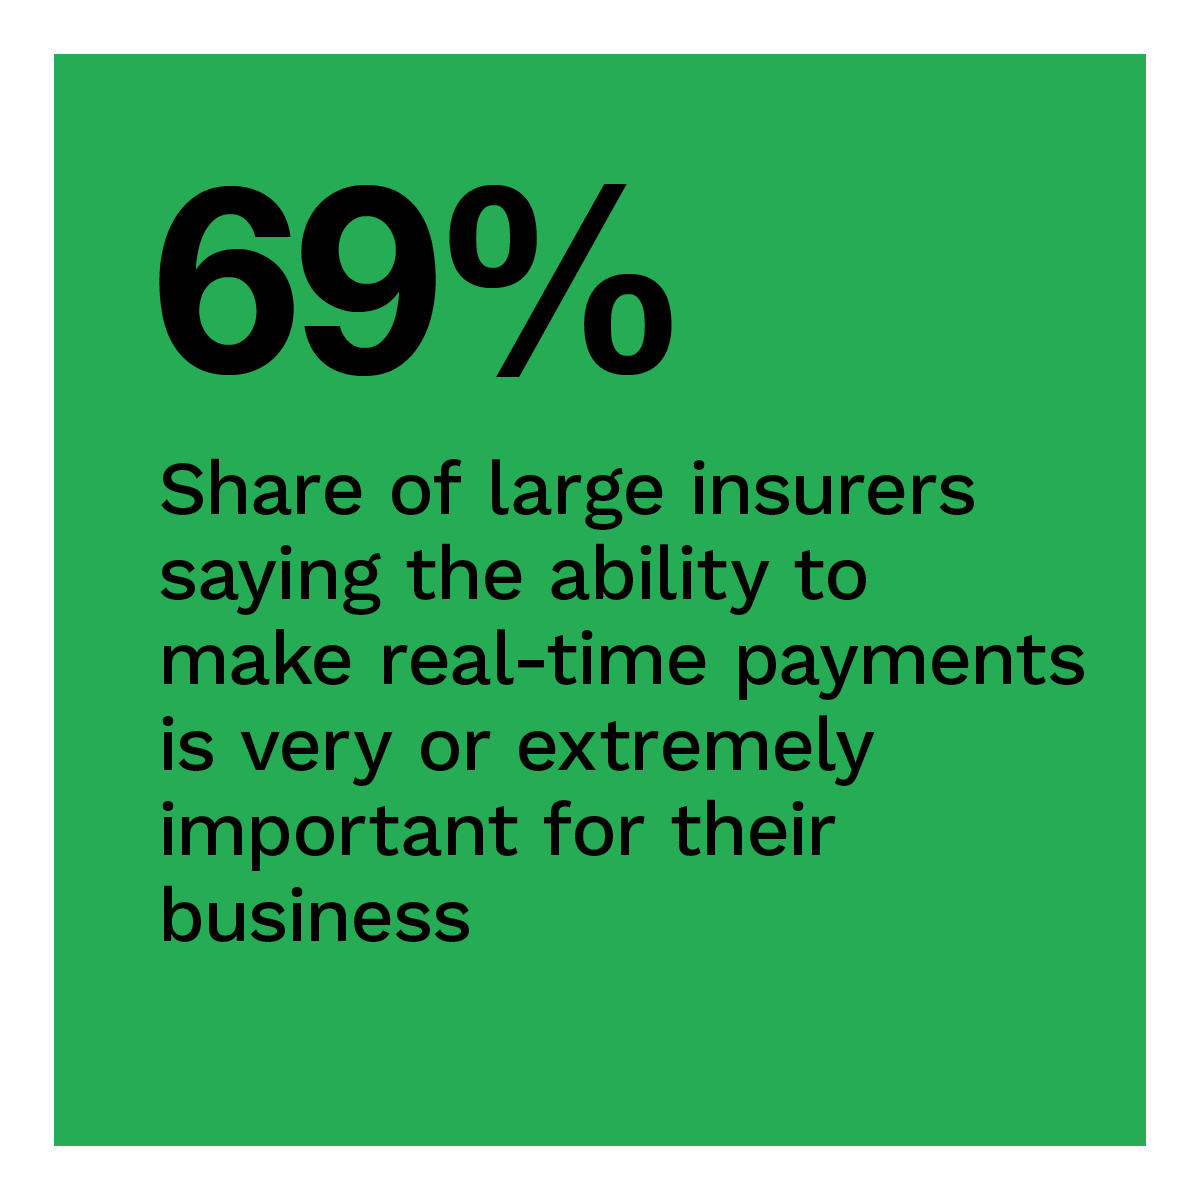 69%: Share of large insurers saying the ability to make real-time payments is very or extremely important for their business